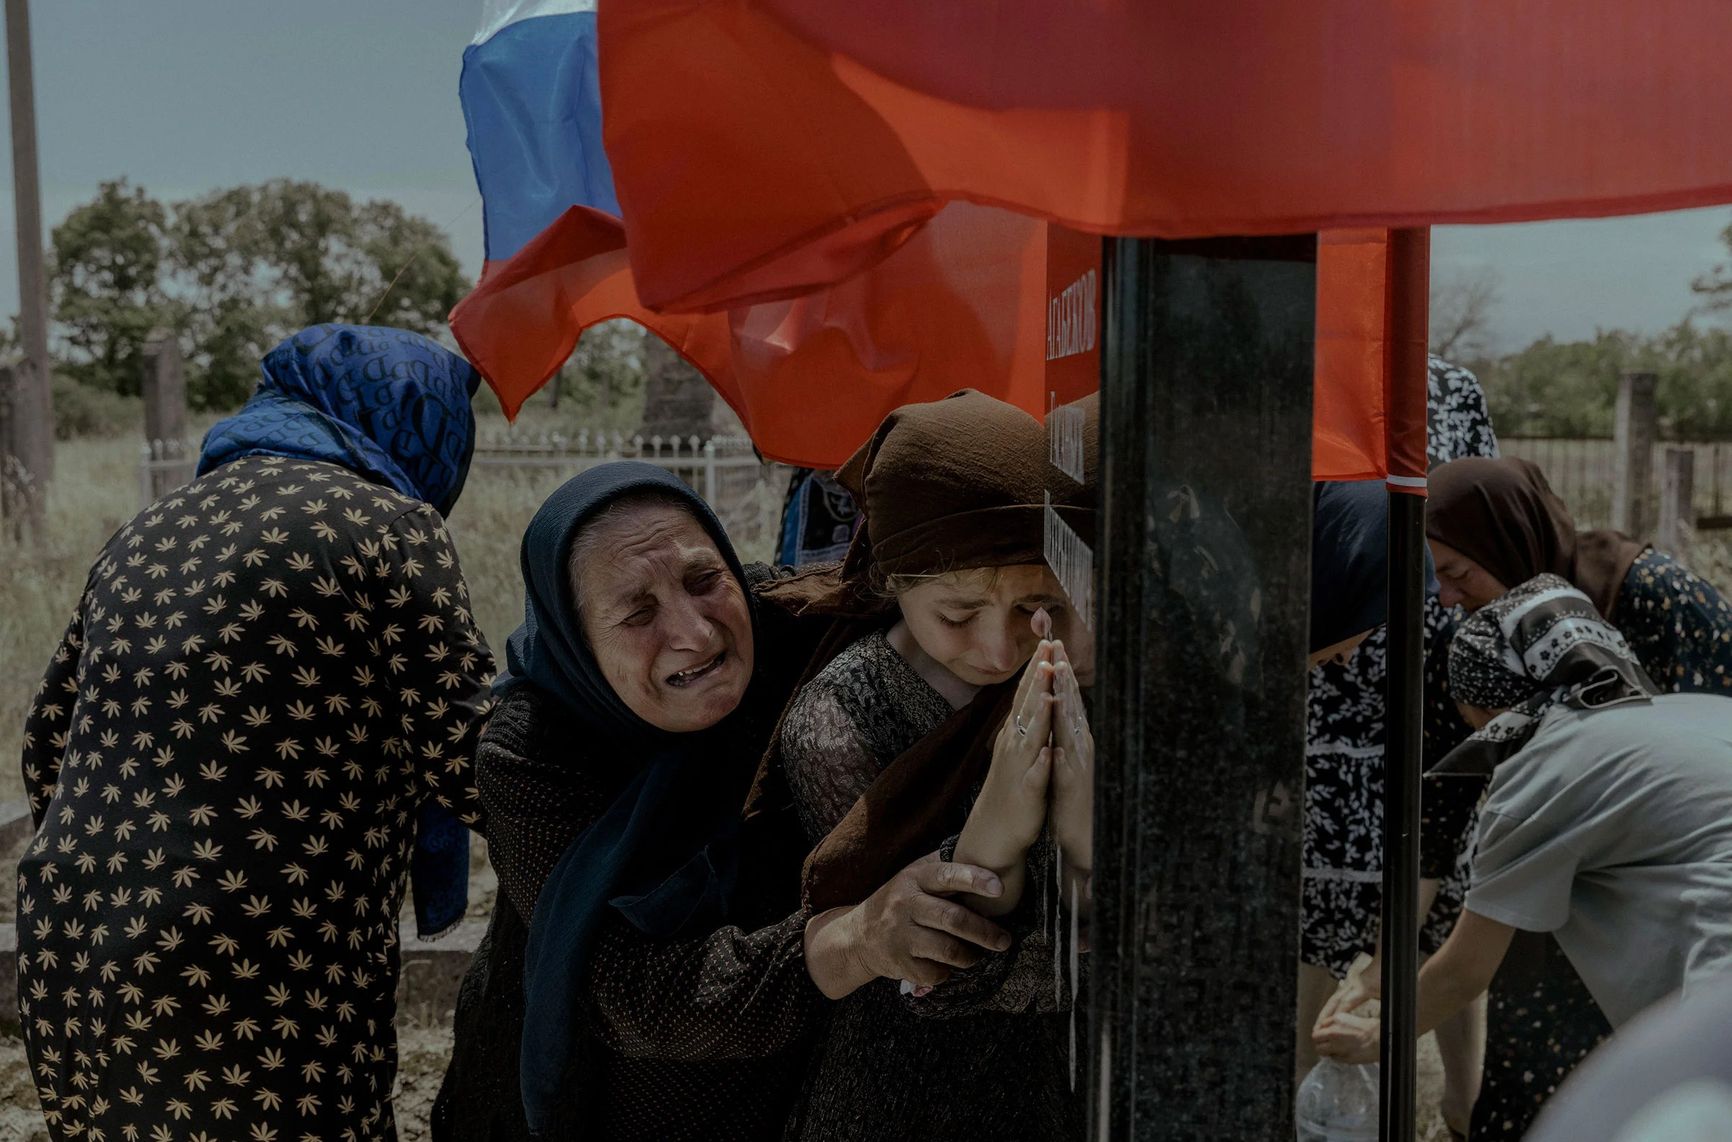 Women mourn the death of their family member and conscript soldier Gasanbek Agabekov, who was killed in Ukraine the 27th of May, in Aglobi, Dagestan, Russia, on June 16. In Dagestan, family members of the deceased meet at regular intervals to grieve. An imam said that fifteen other men from Gasanbek’s area had died in the war. The republic that has seen the highest number of casualties in the war in Ukraine is also one of poorest republics in Russia.